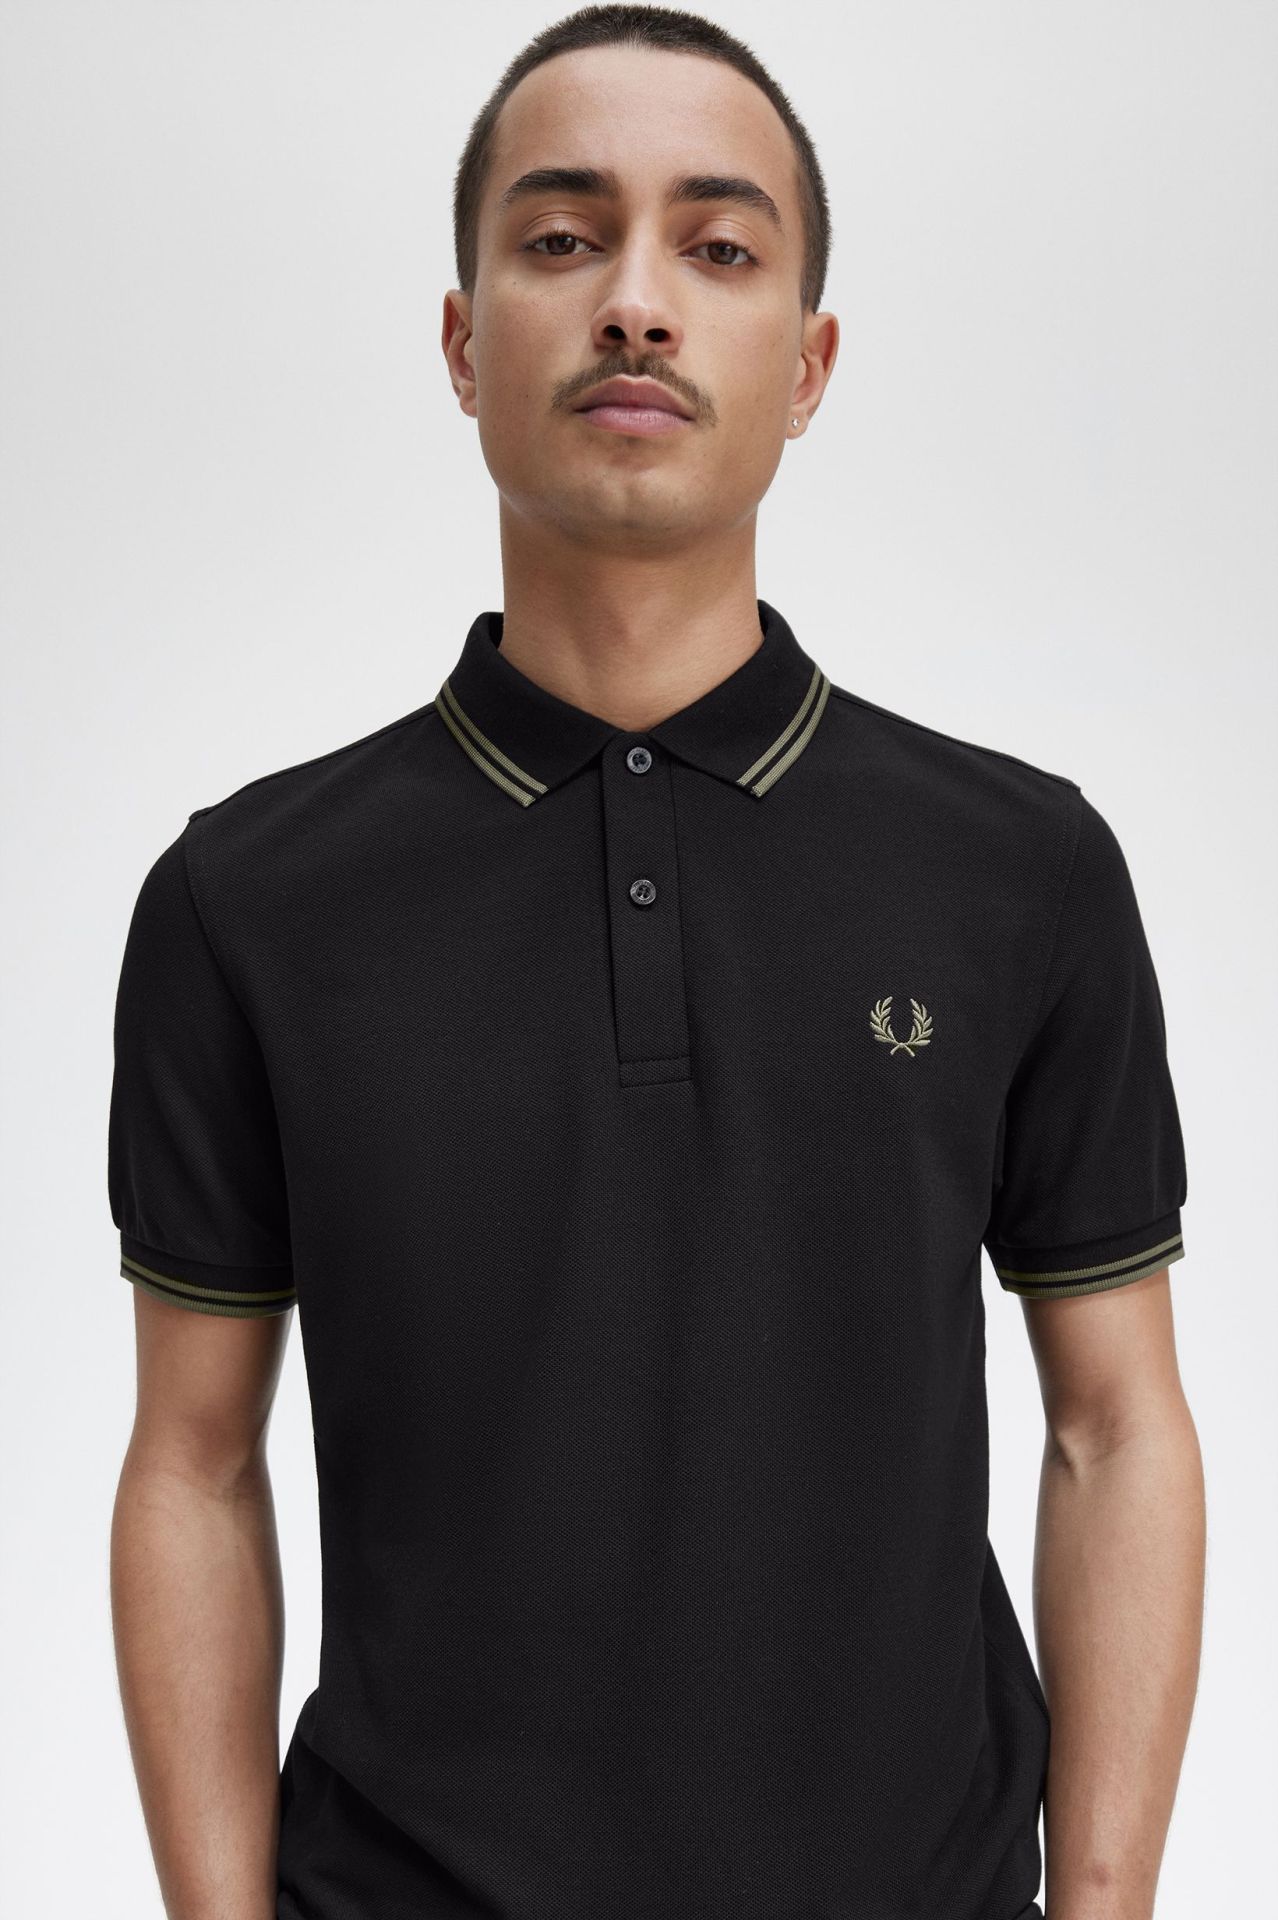 Fred Perry Twin Tipped Shirt in Black/Green 